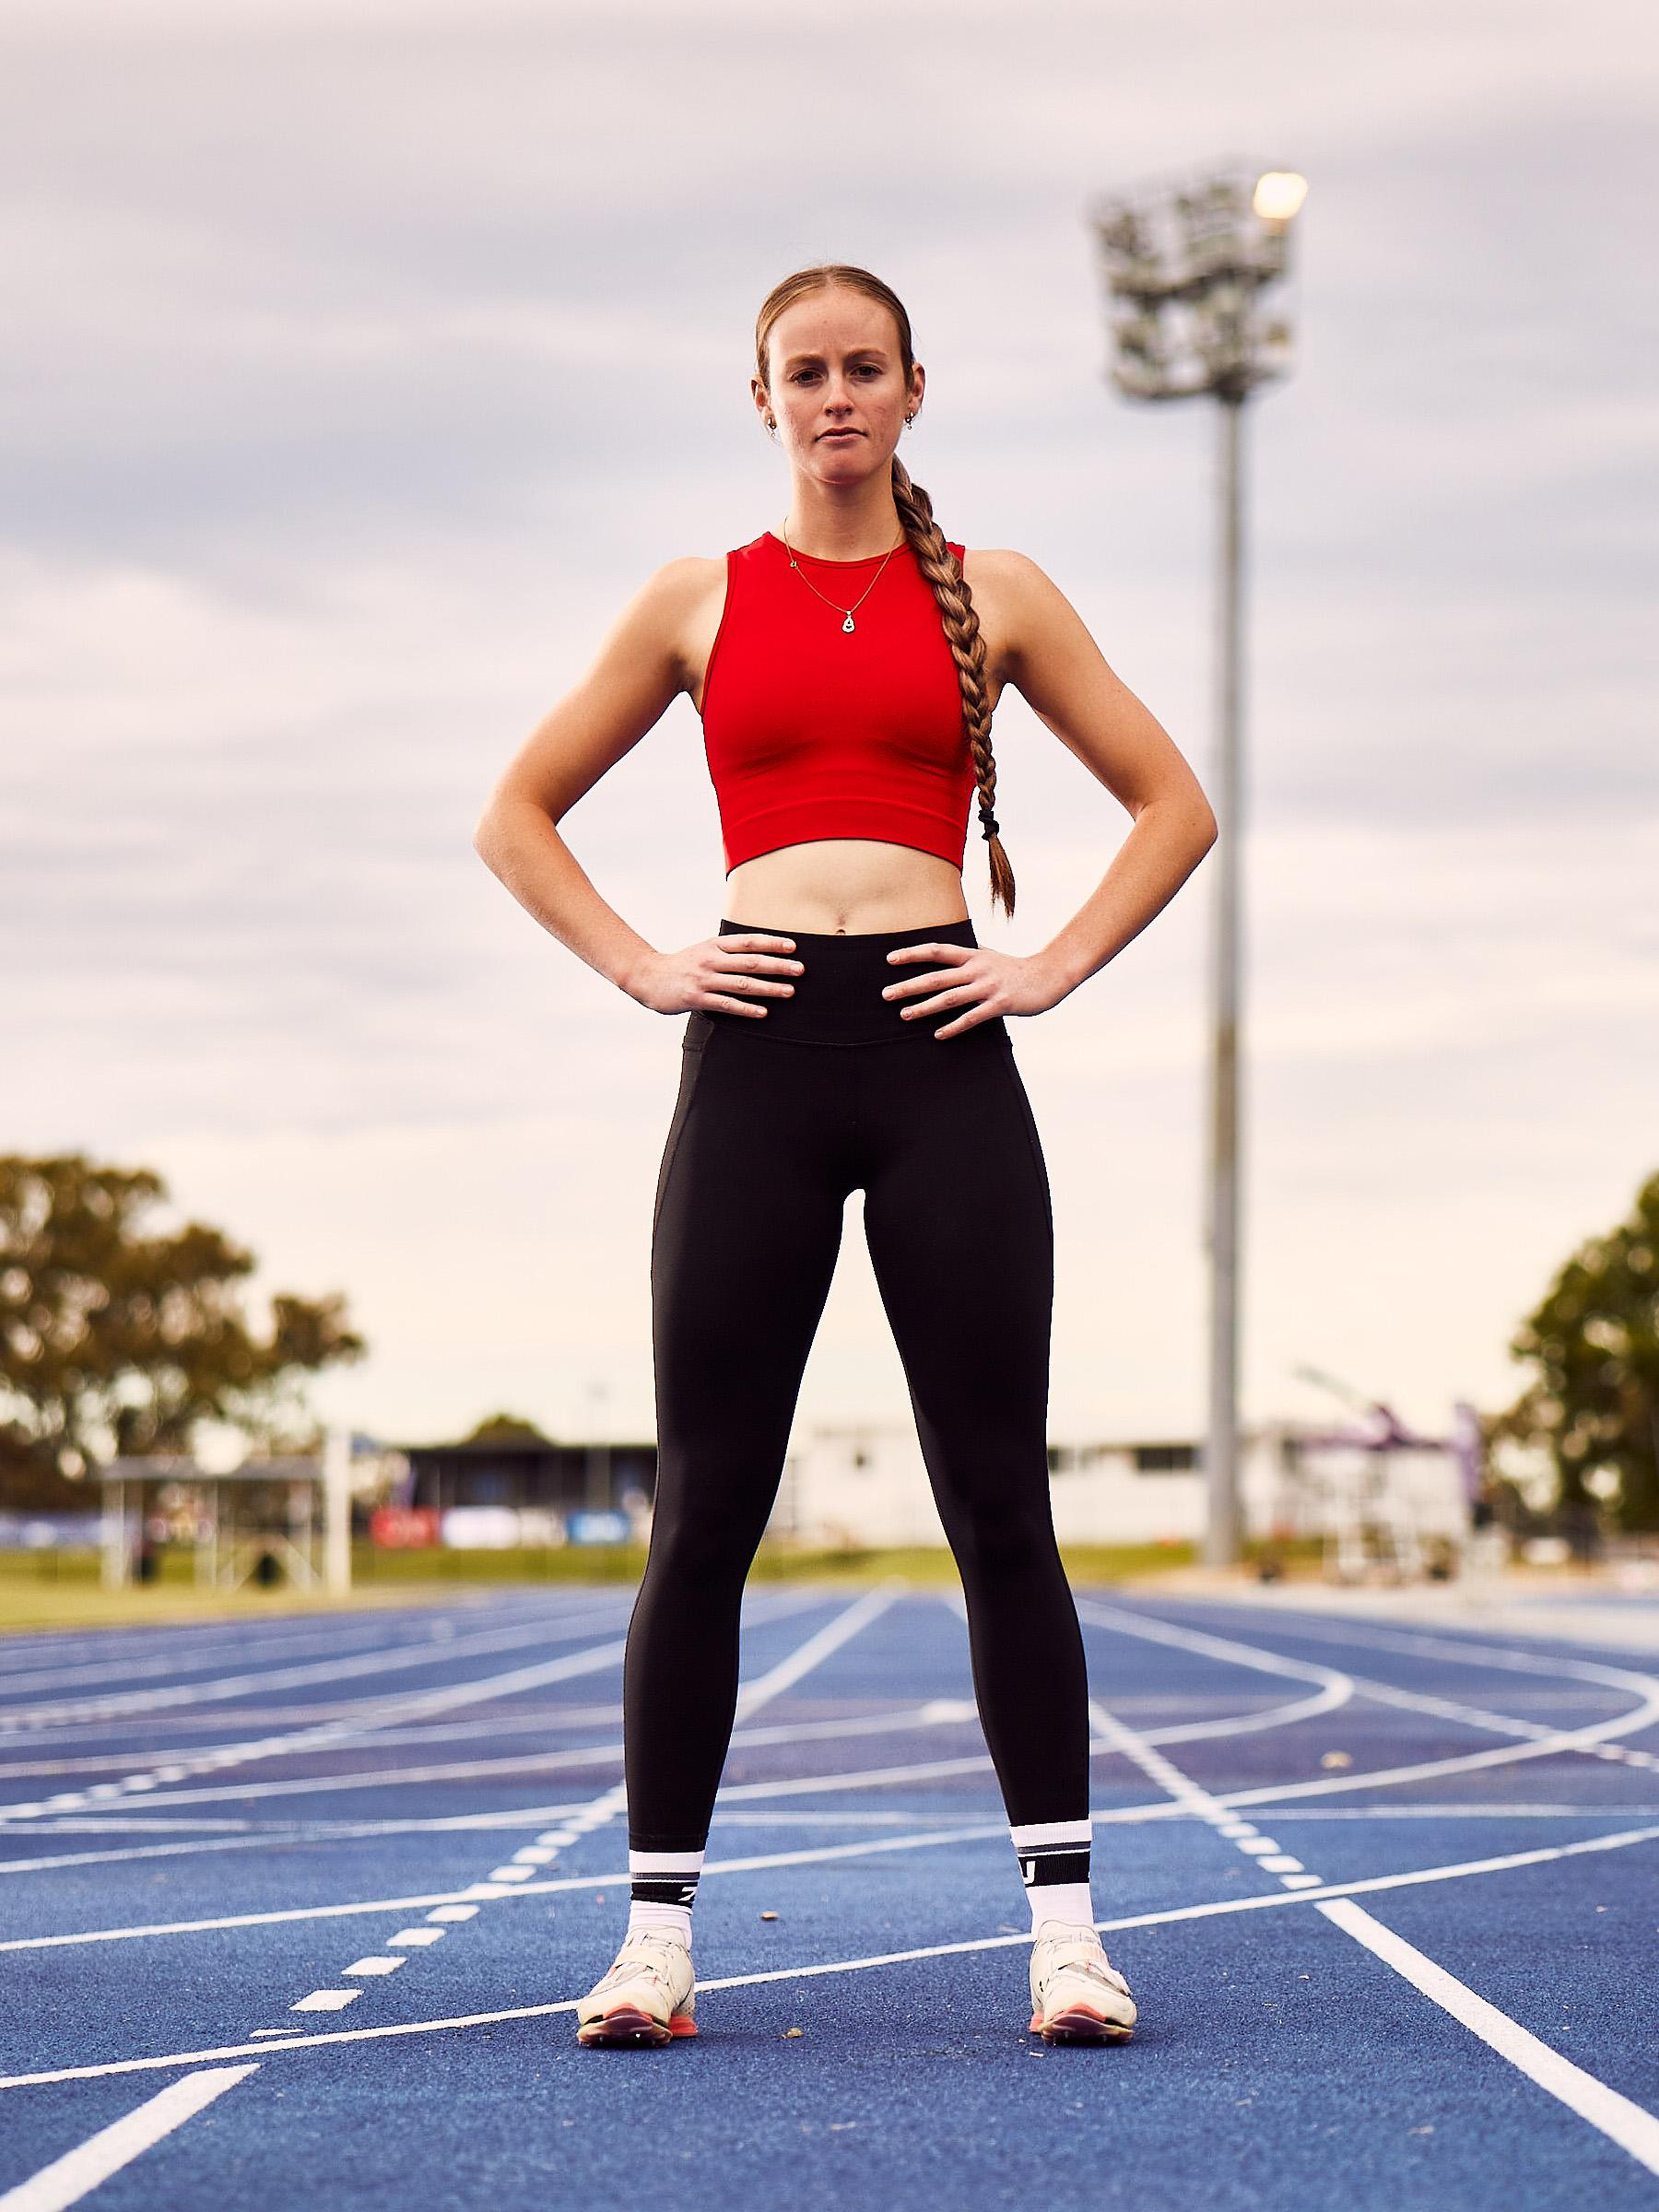 Young athlete in the middle of a blue track, standing strong with hands on hips